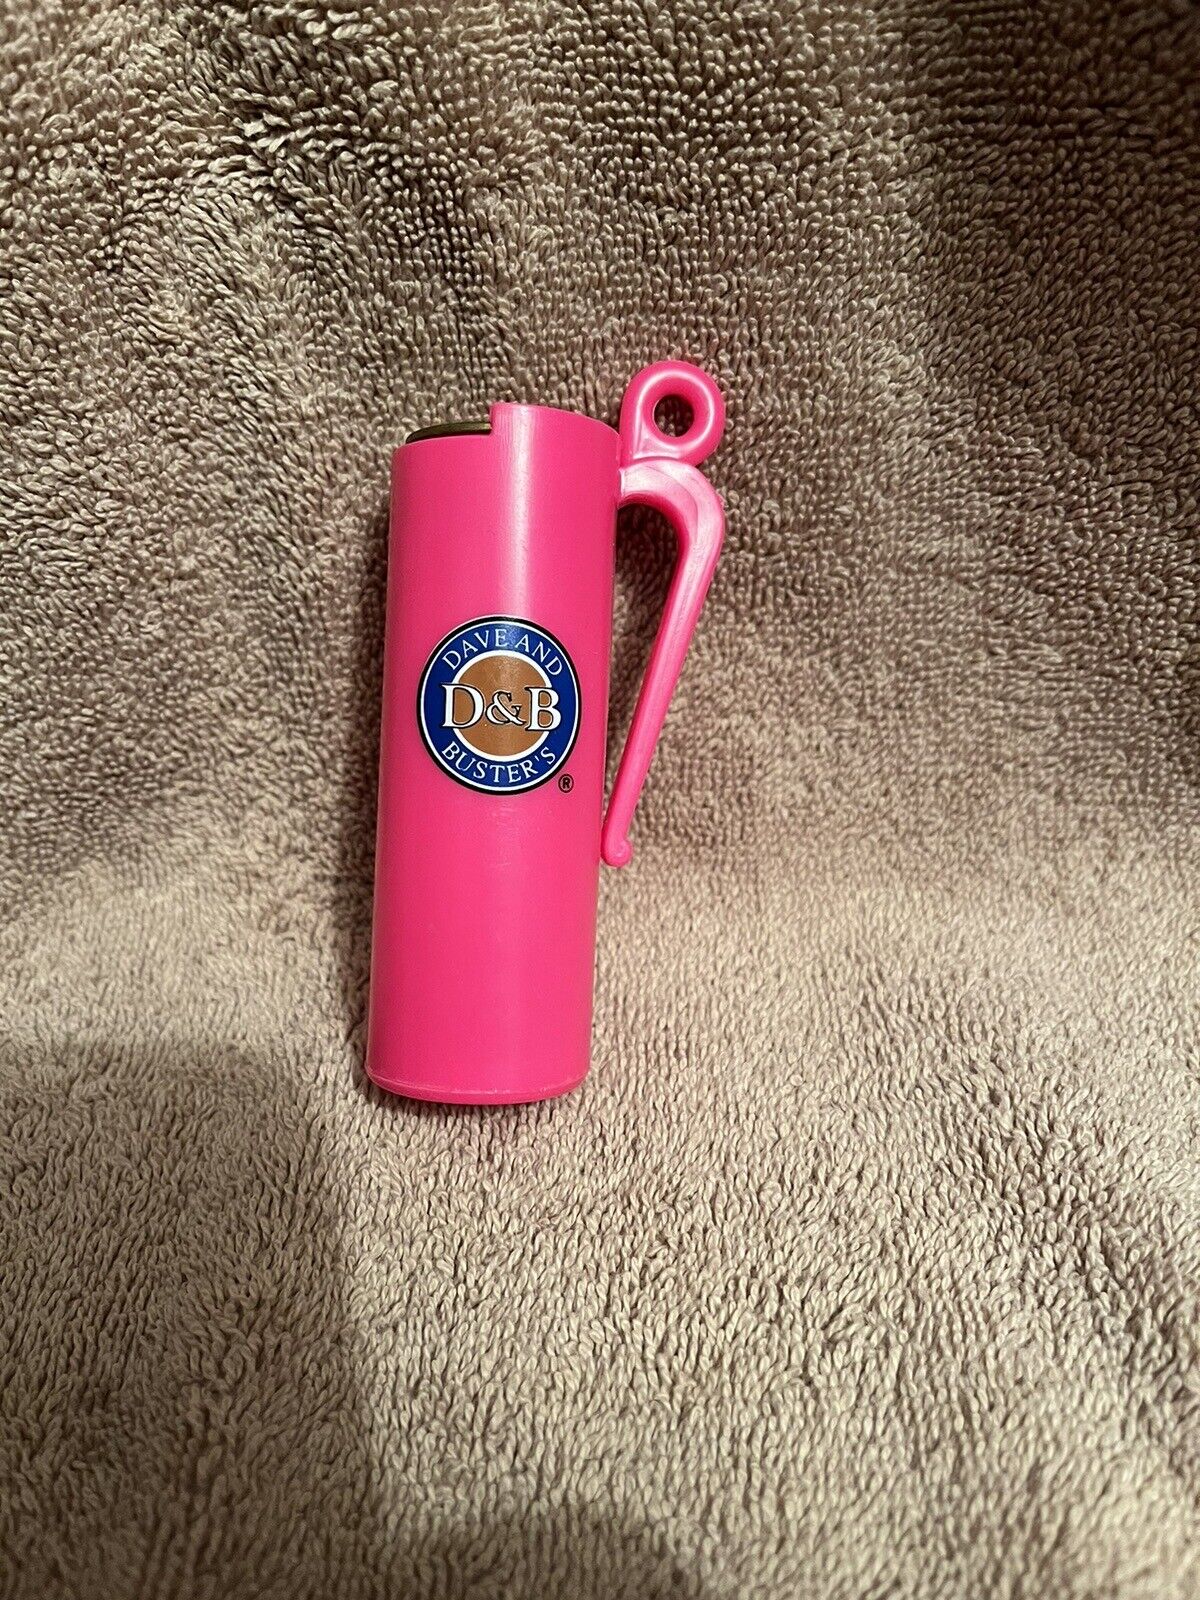 VINTAGE DAVE & BUSTER'S COIN DISPENSER FROM LATE 1990s - EXTREMELY RARE